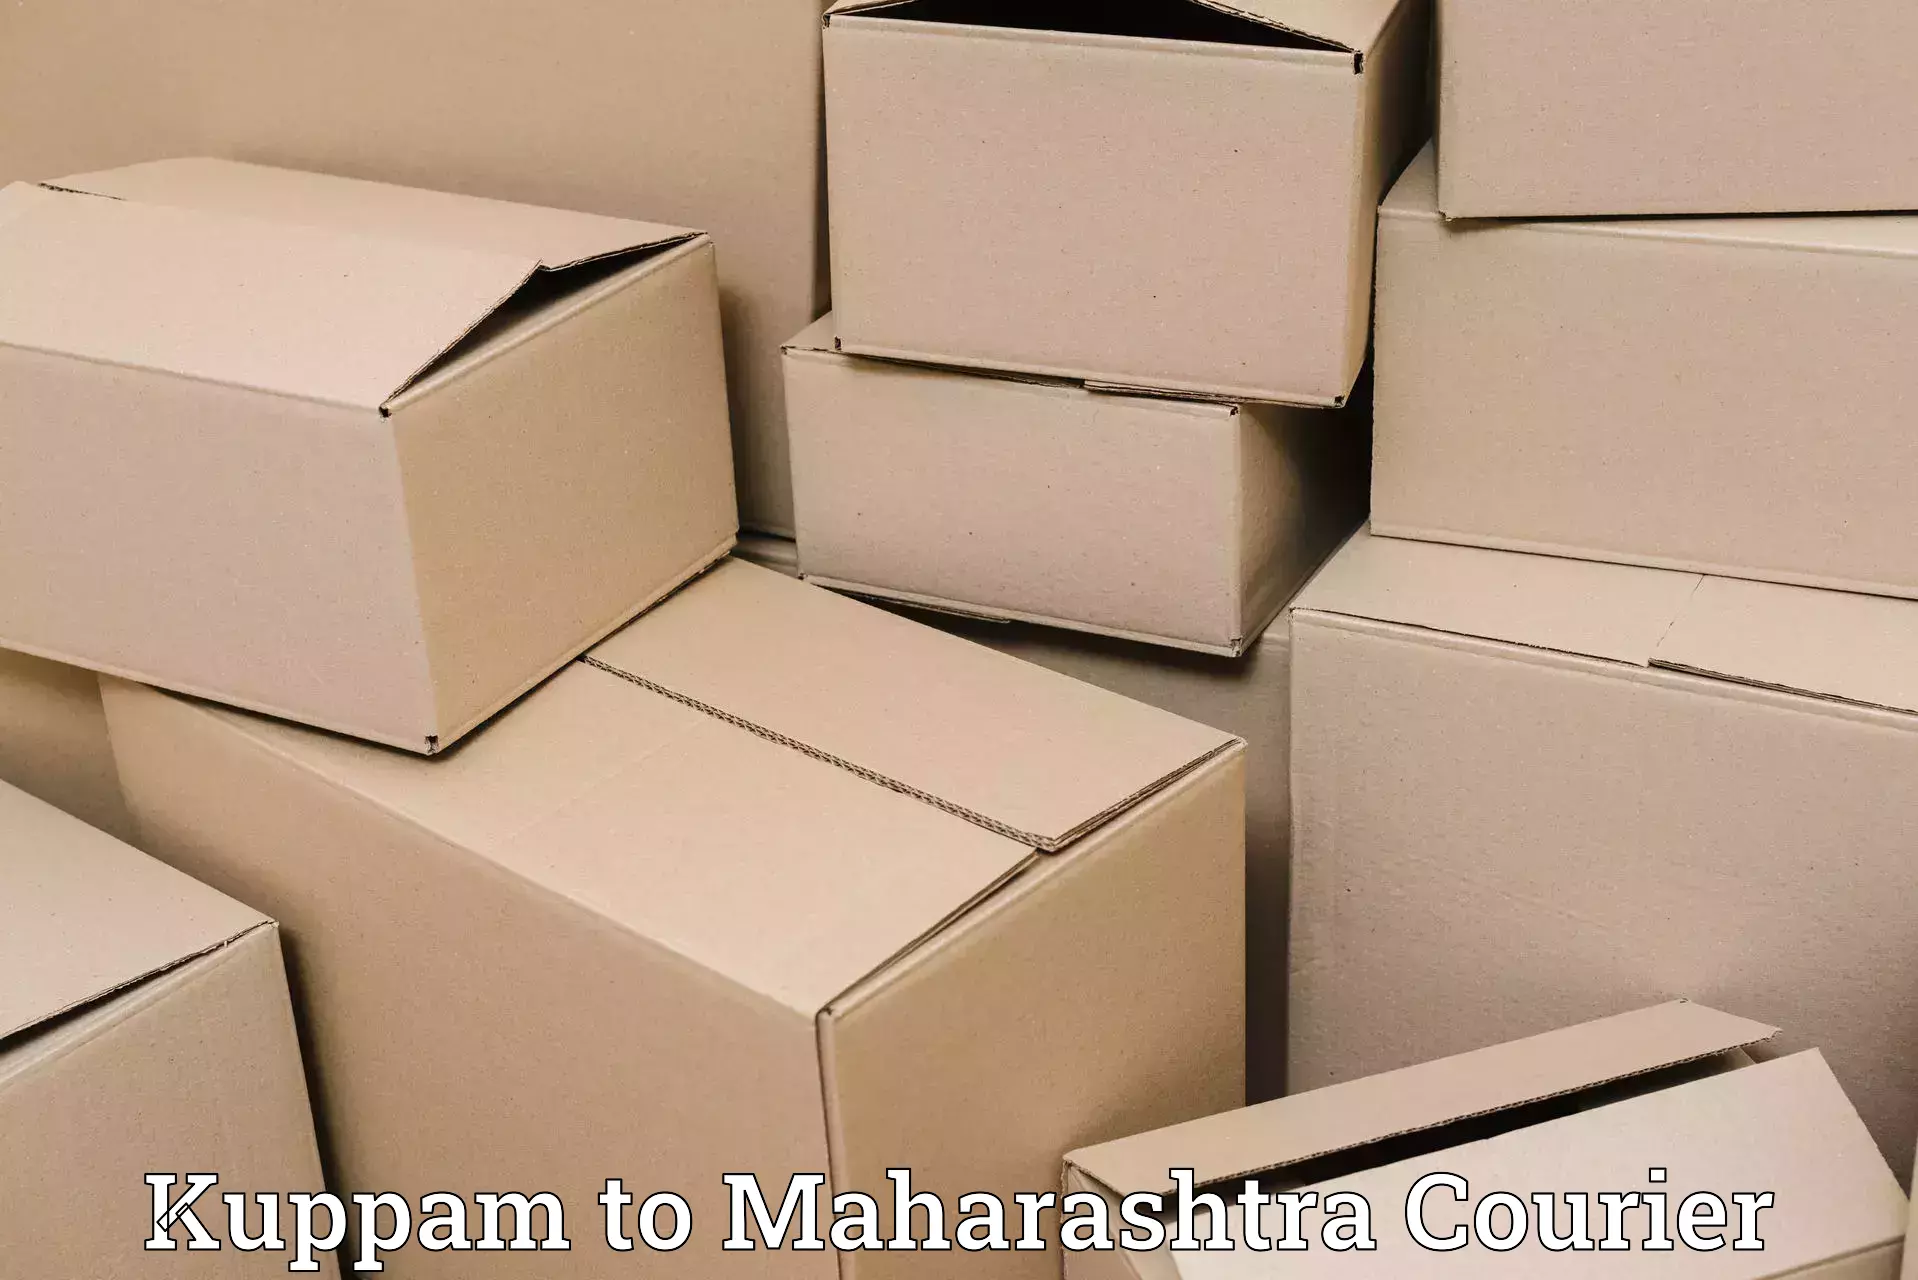 Tailored shipping plans in Kuppam to Maharashtra